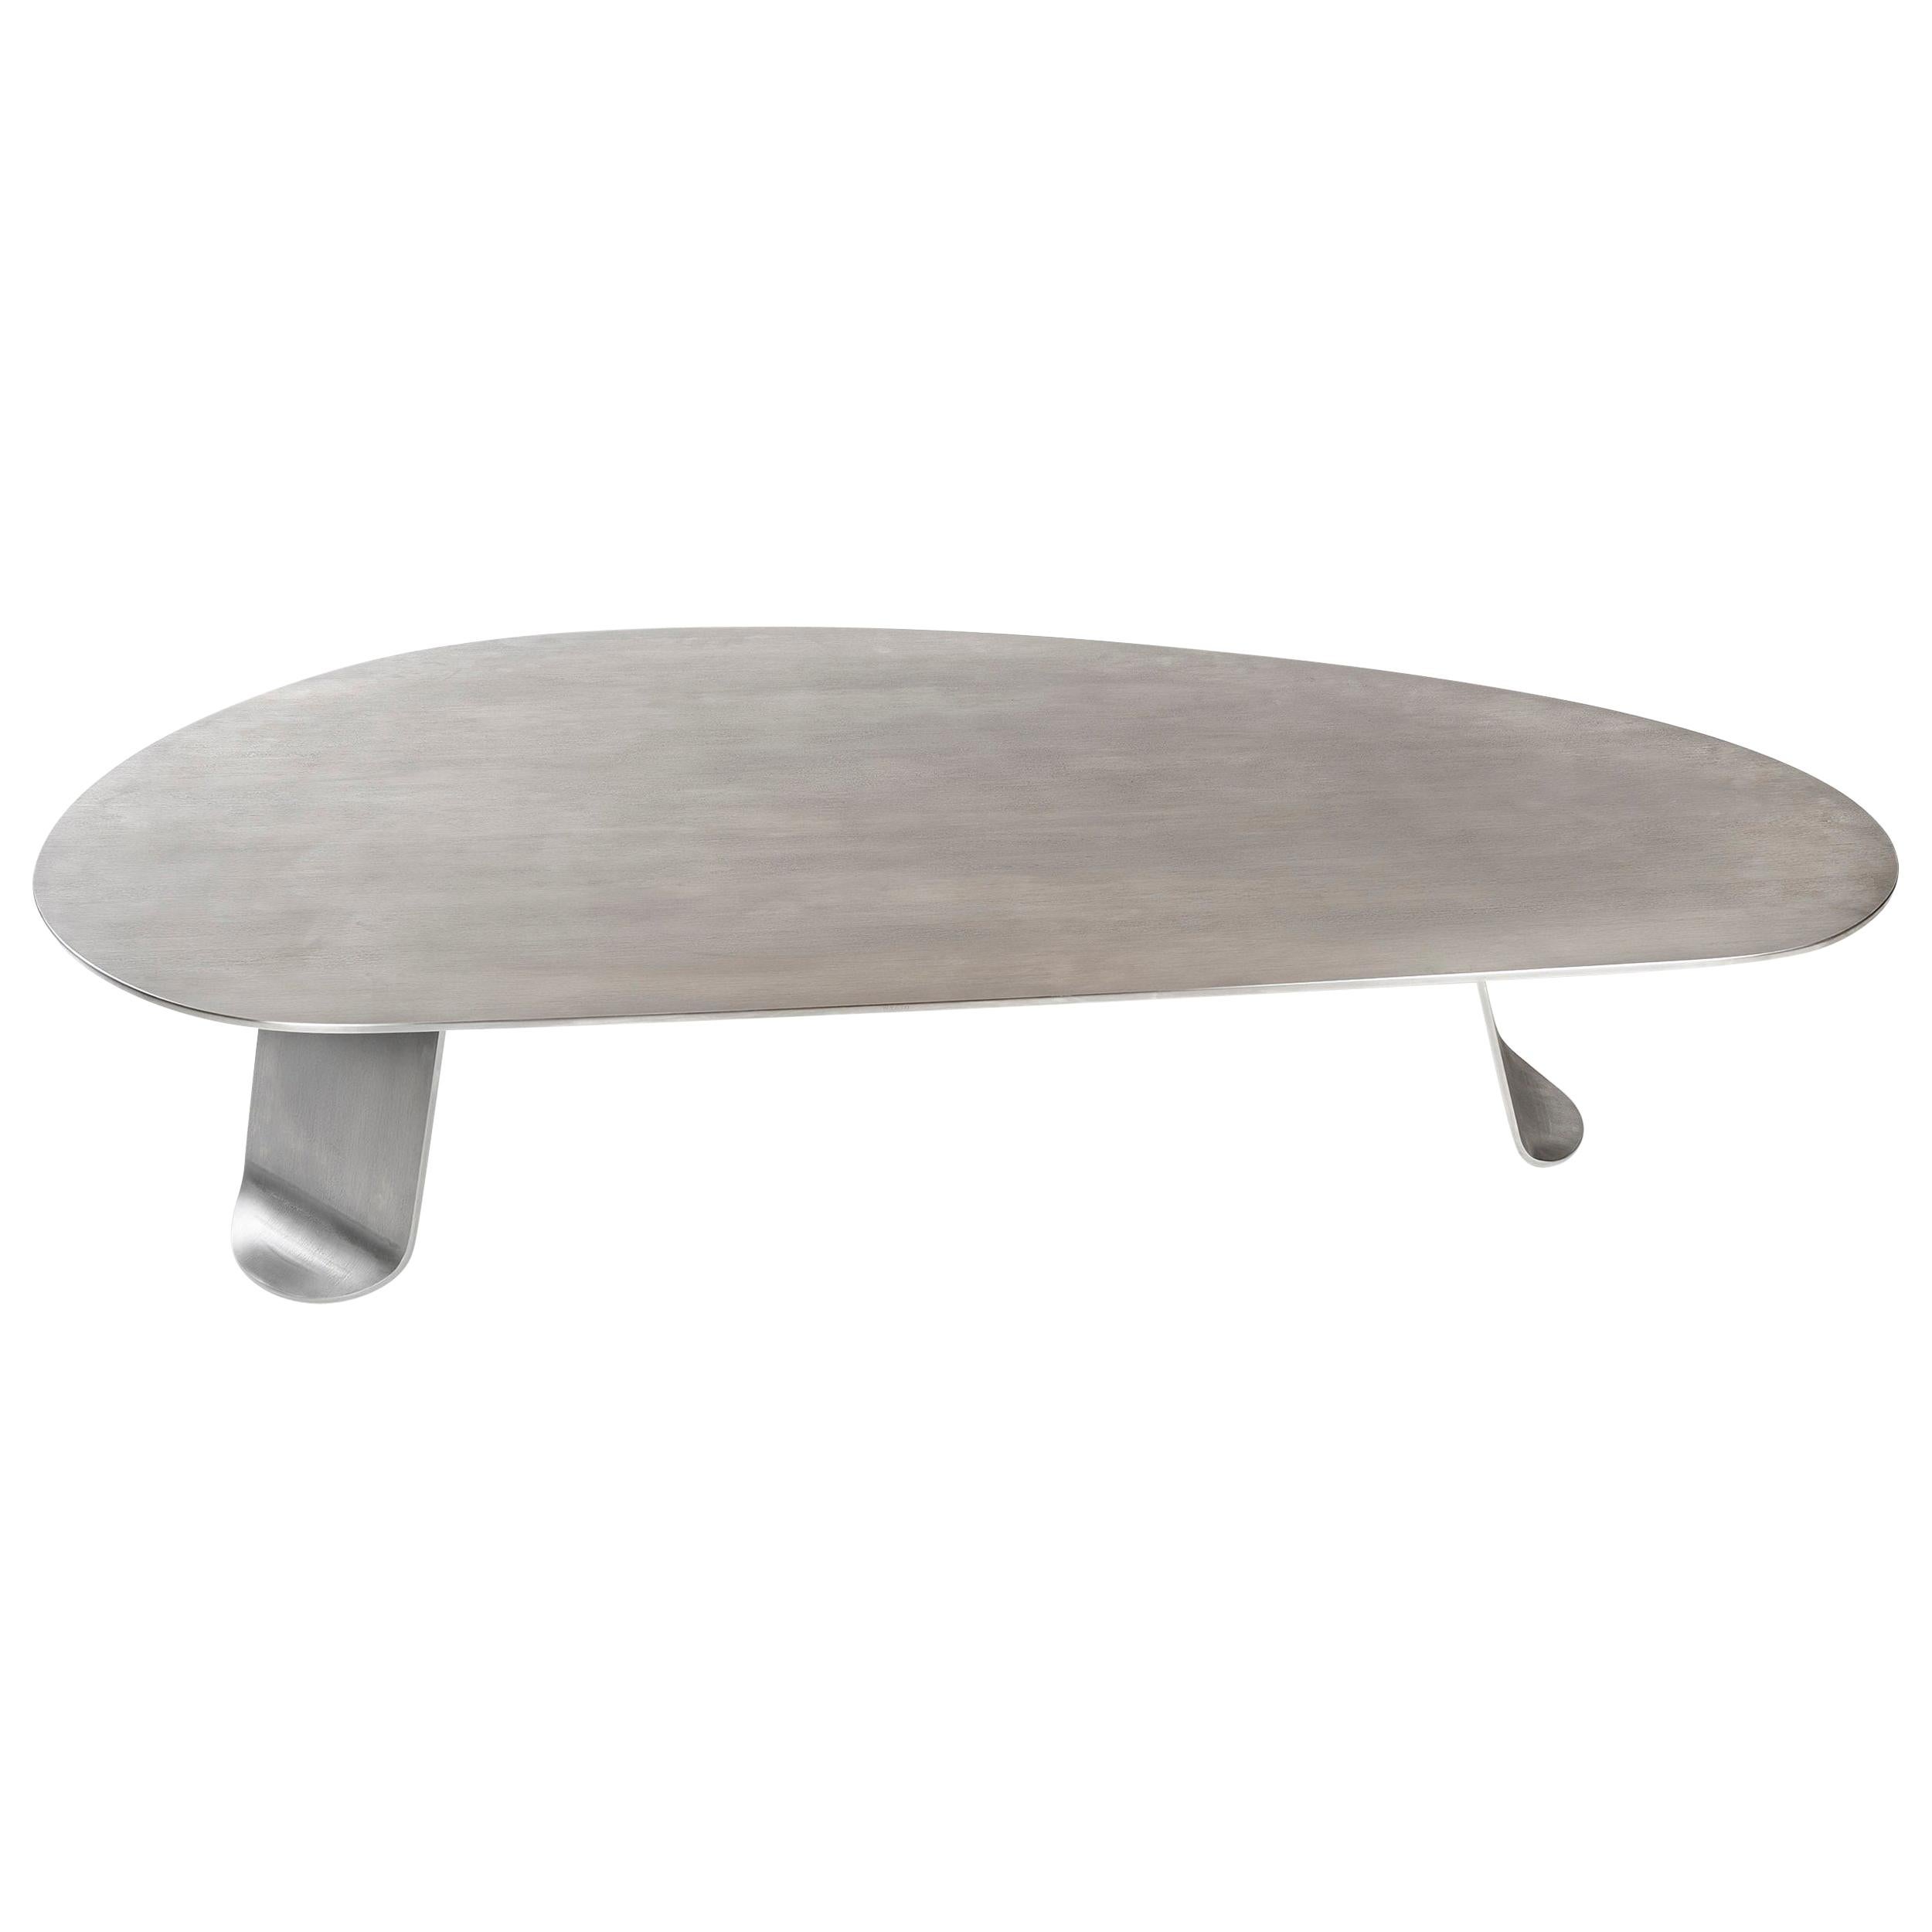 WYETH Chrysalis Table No. 1 in Natural Grain Stainless Steel